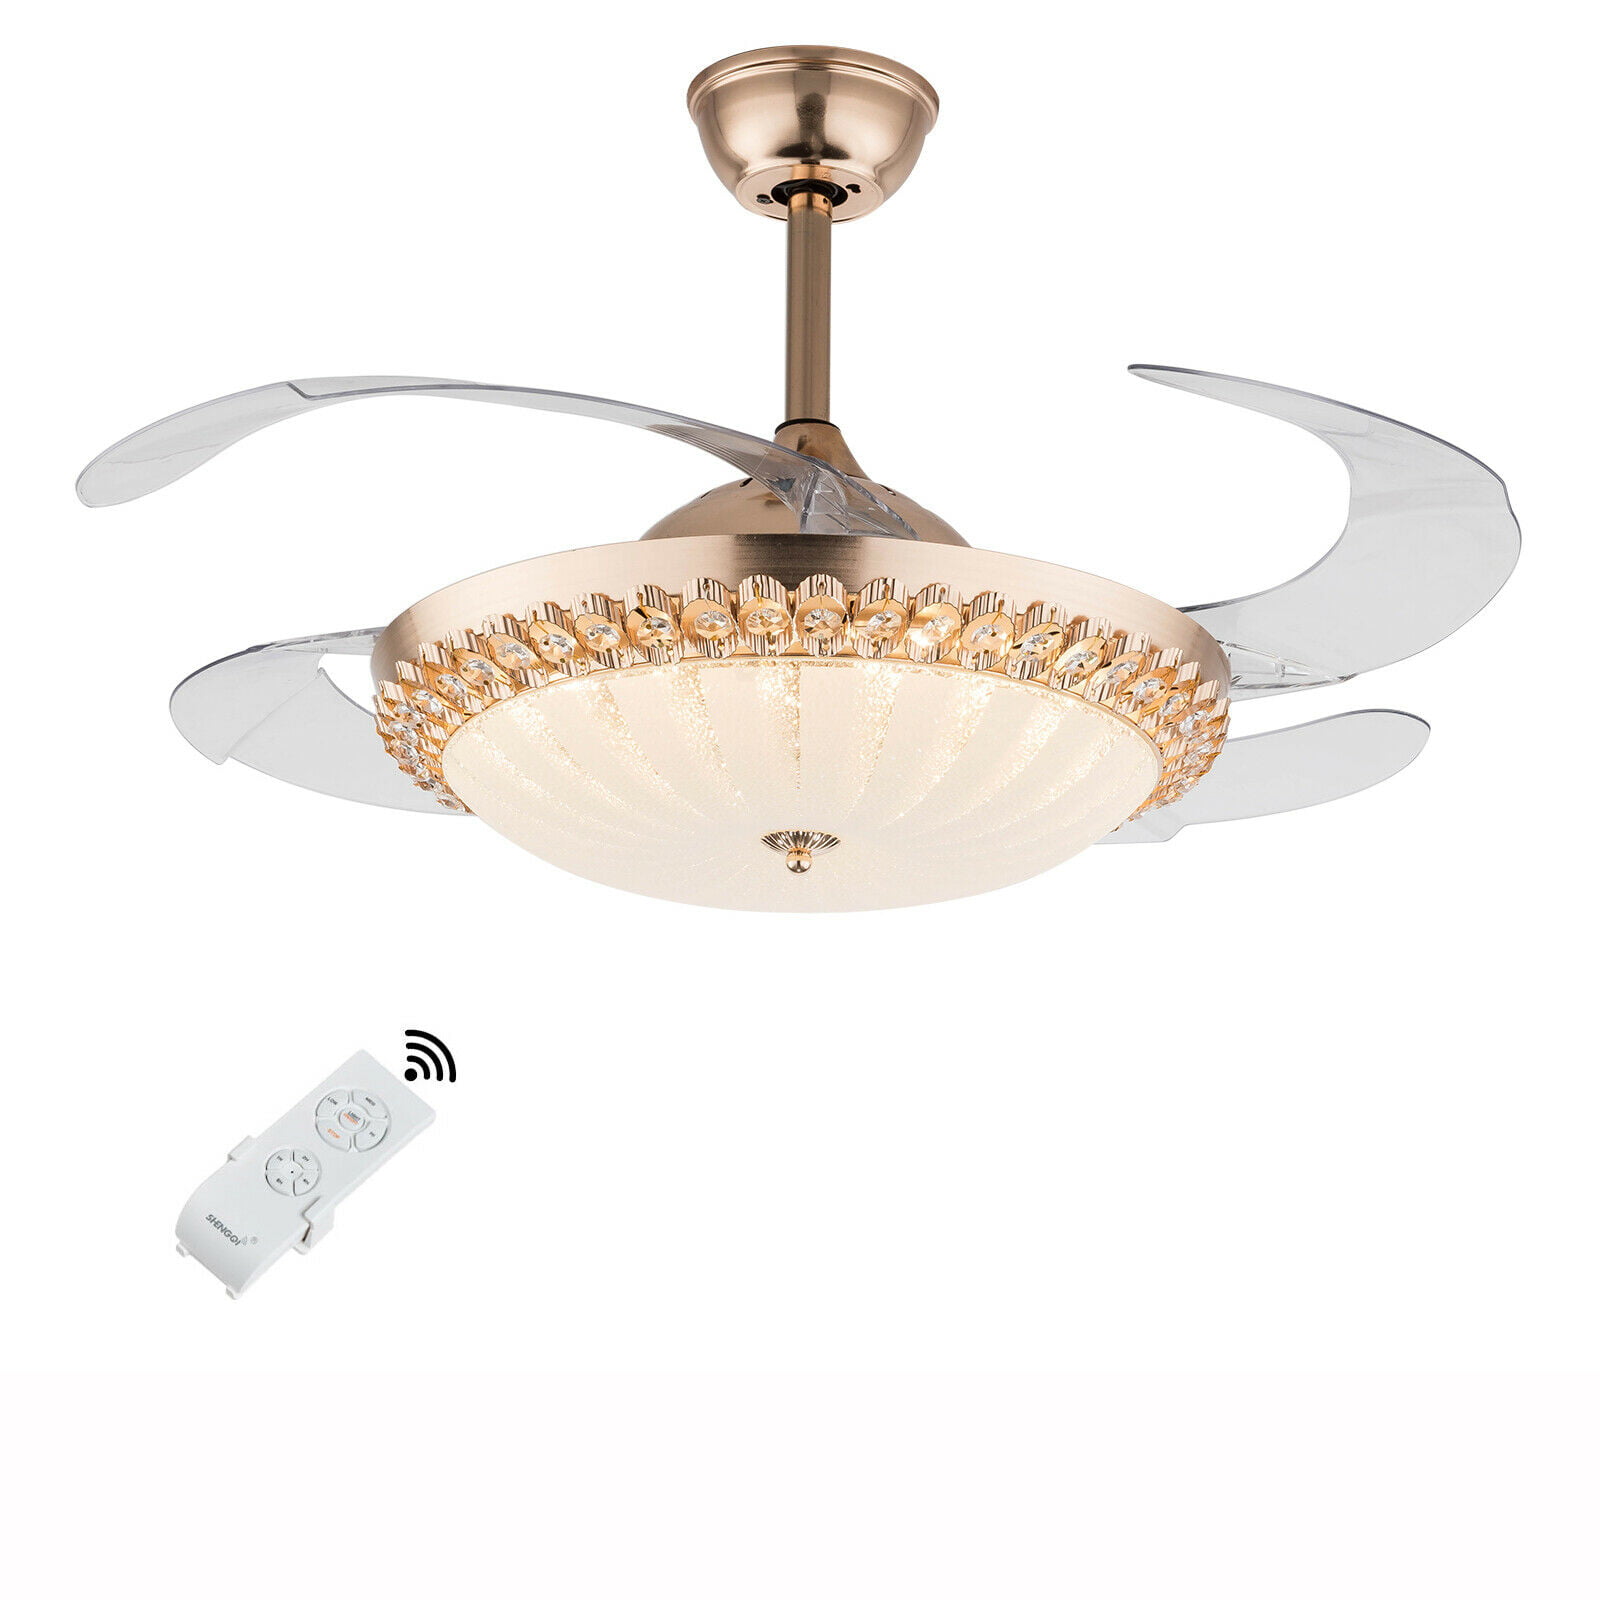 Details about   42" Crystal Invisible Ceiling Fan Light Silver Remote Control LED Fan Chandelier 